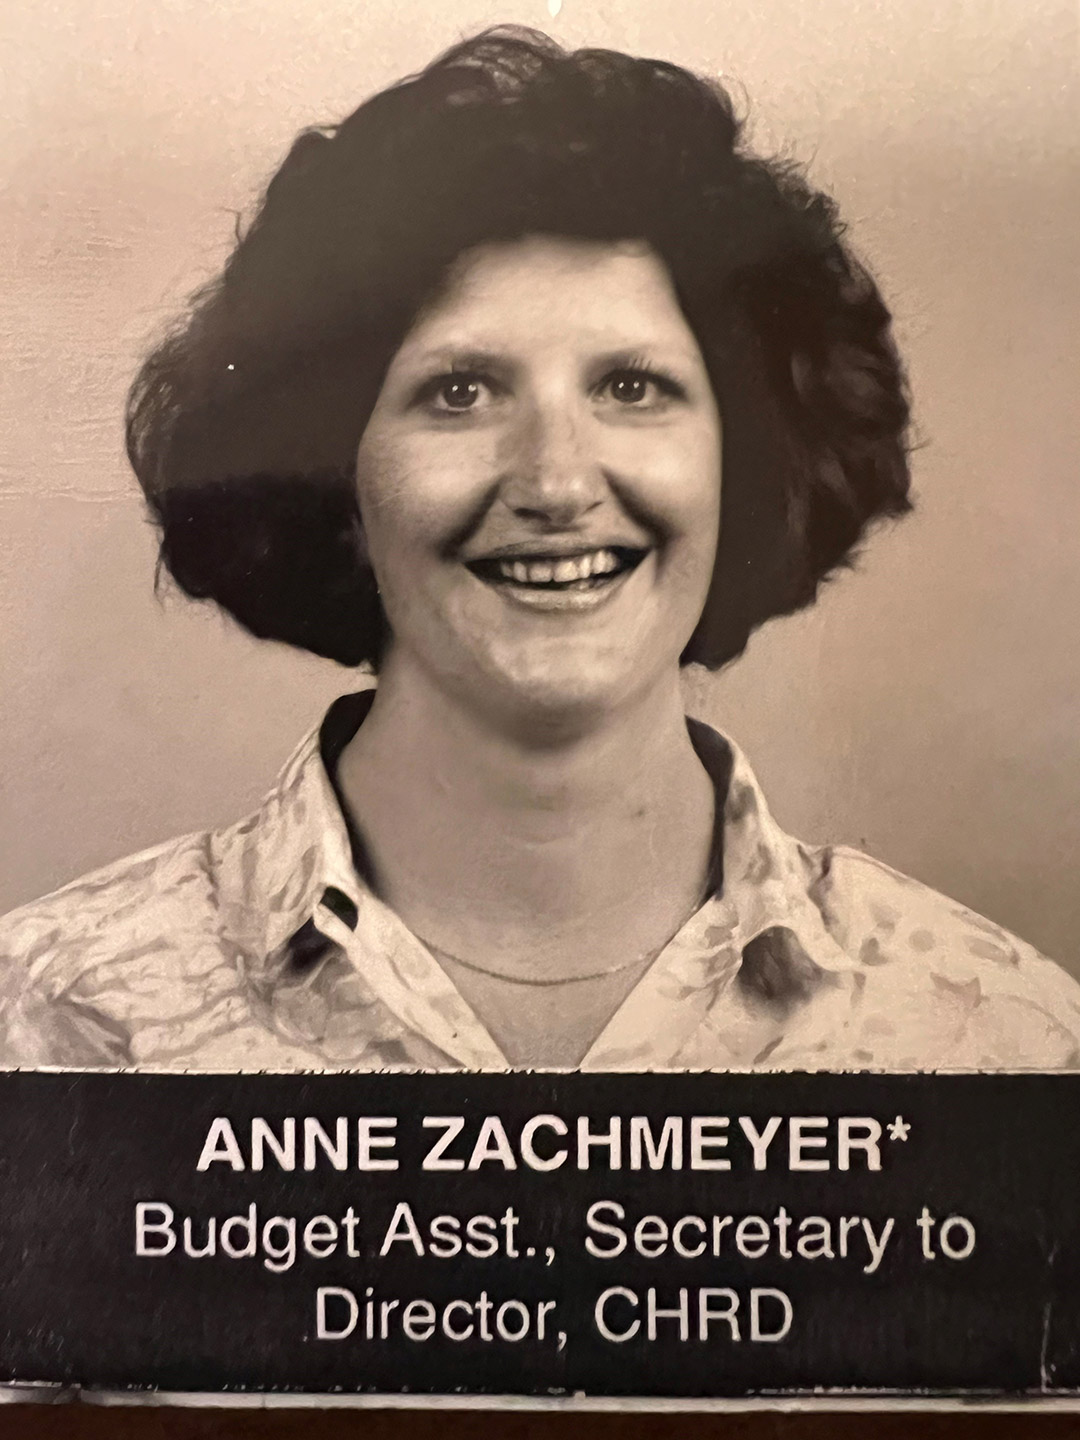 Anne Zachmeyer is shown in an amber an black colored photo from when she started at R I T.